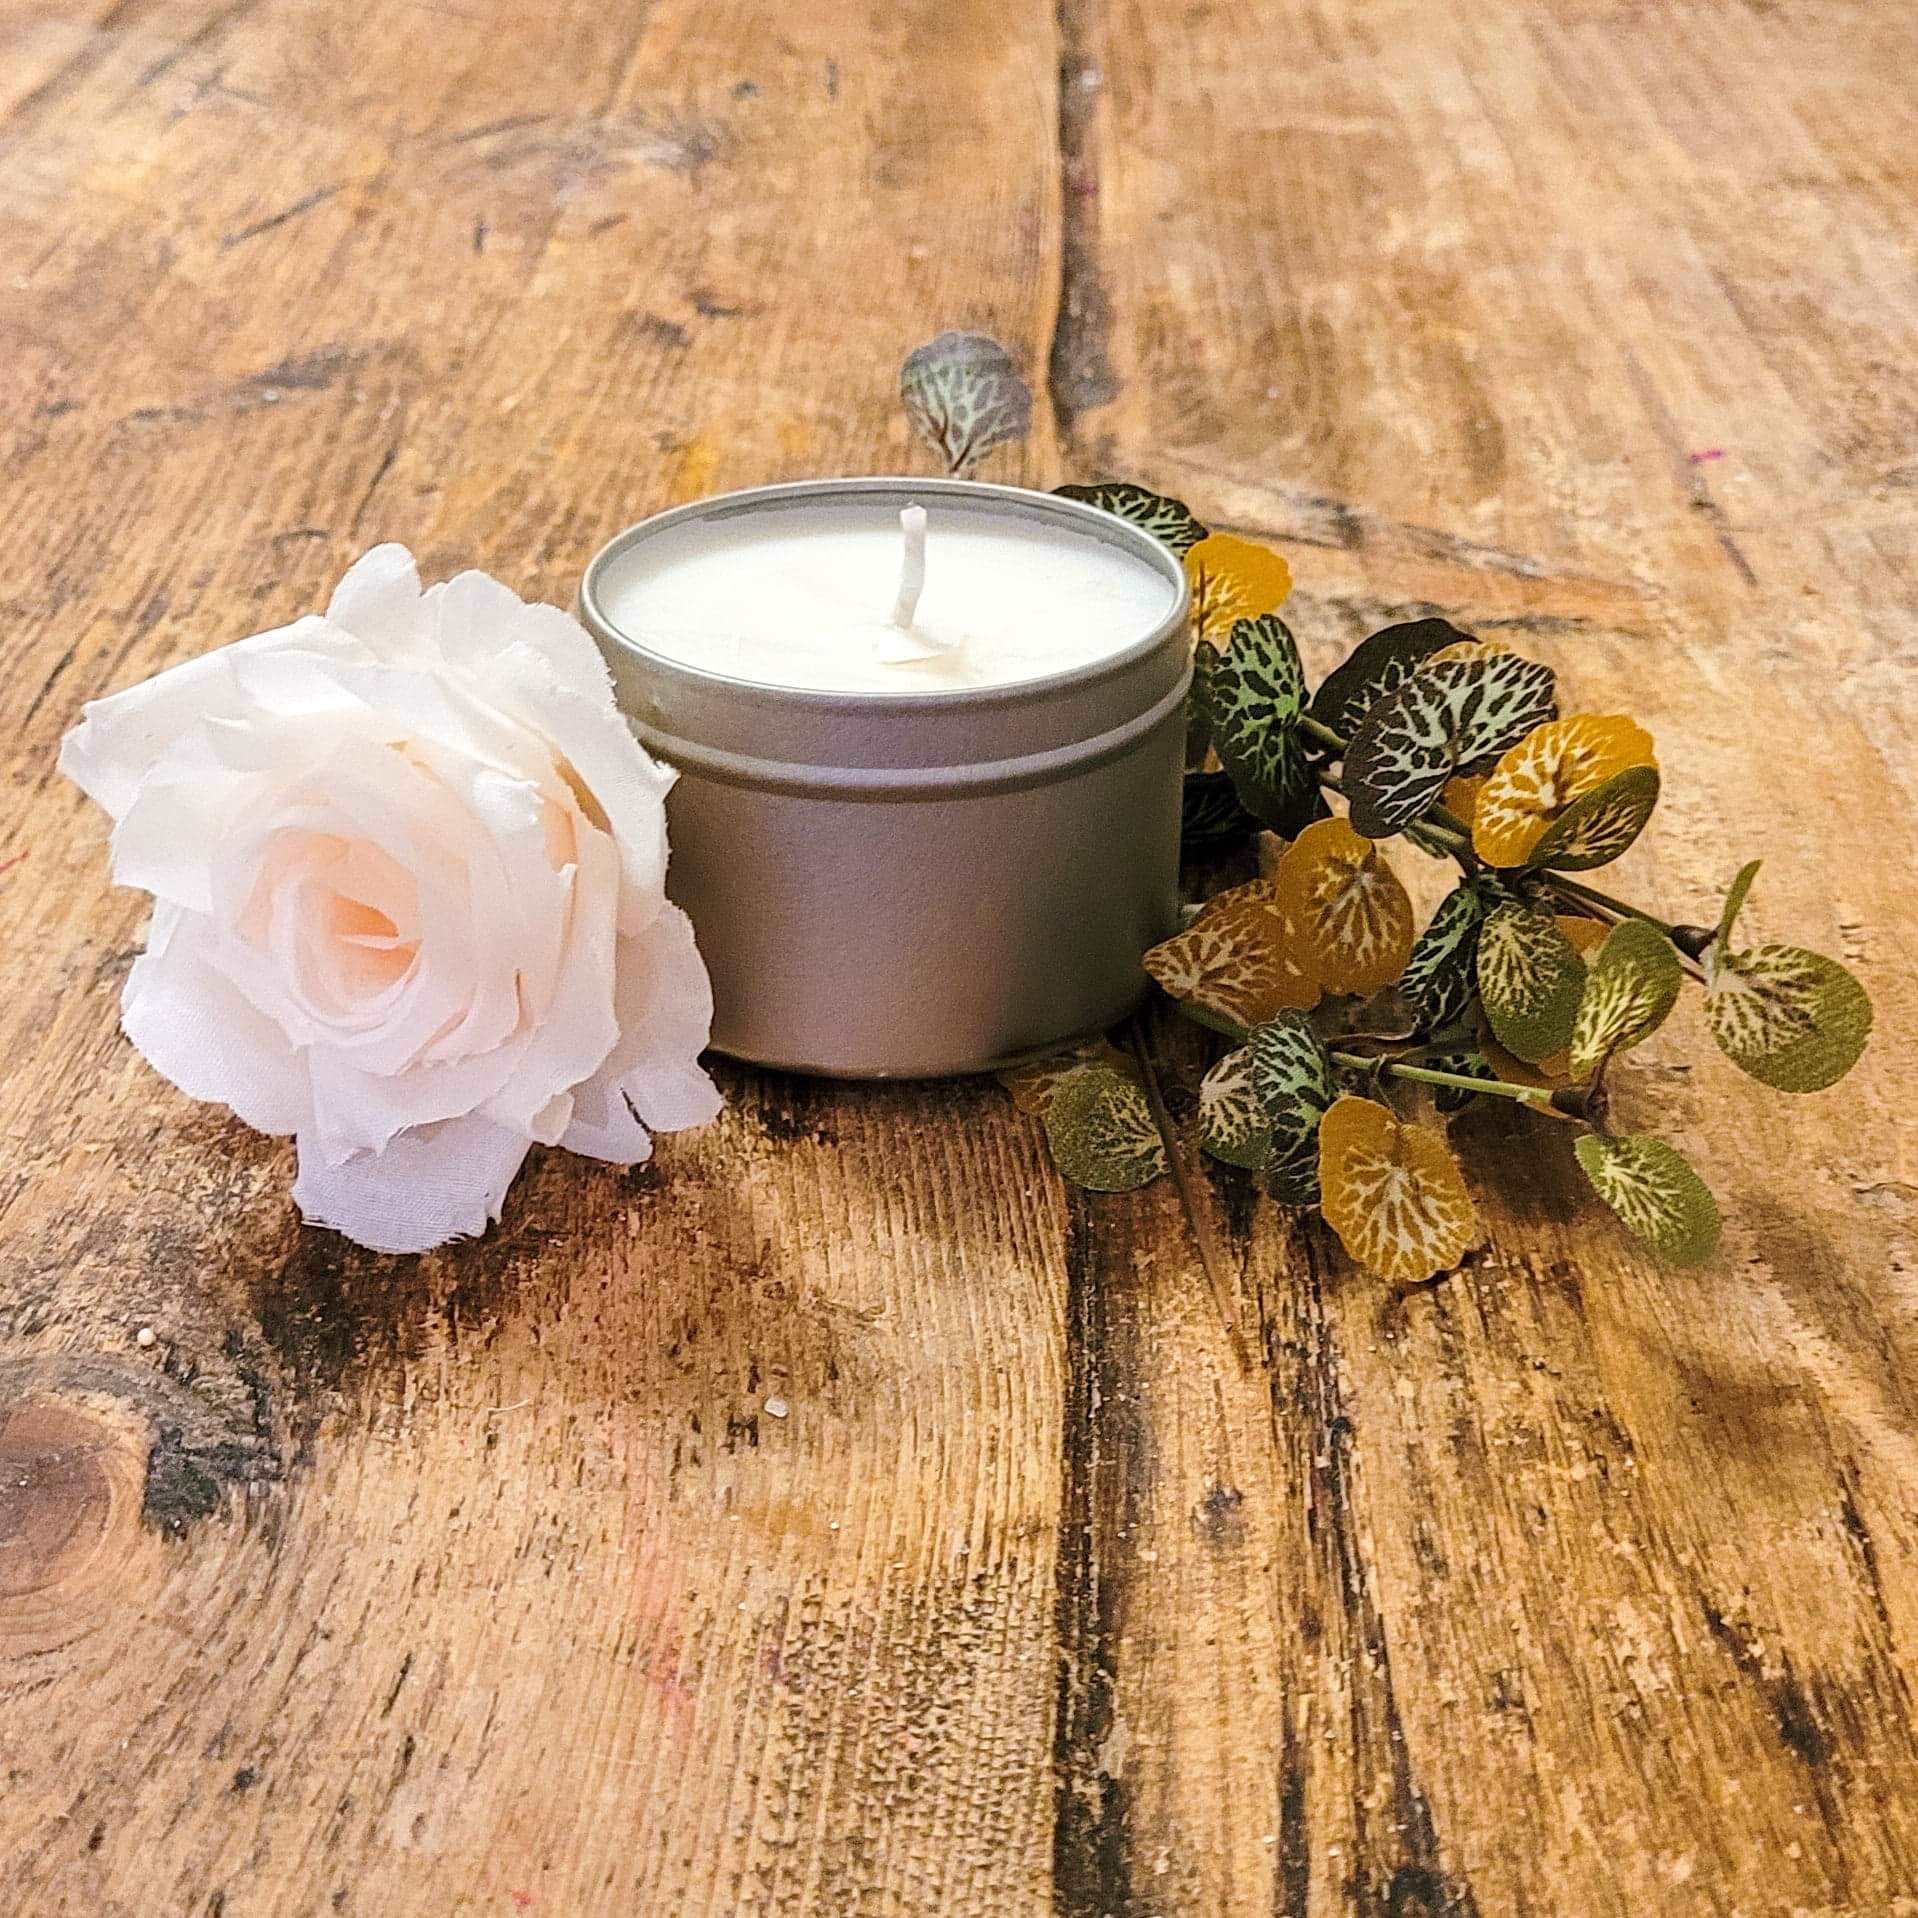 Single Wick Scented Candles - The Cornish Scent Company